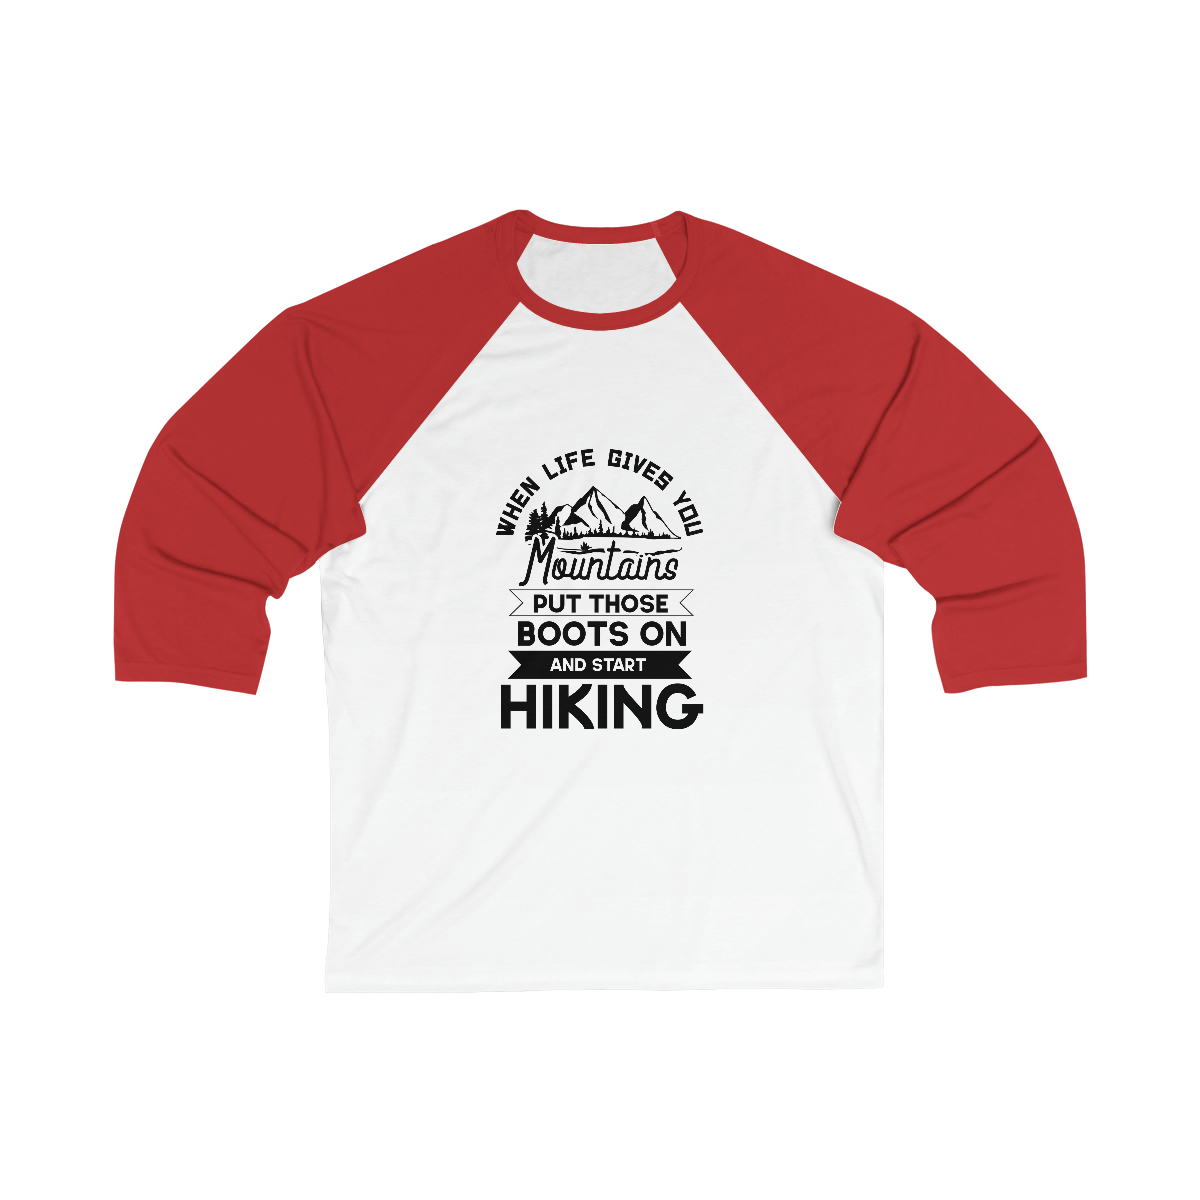 Unisex 3/4 Sleeve Baseball Tee with Motivational Mountain Hiking Quote Graphic - $33.99 - $41.20